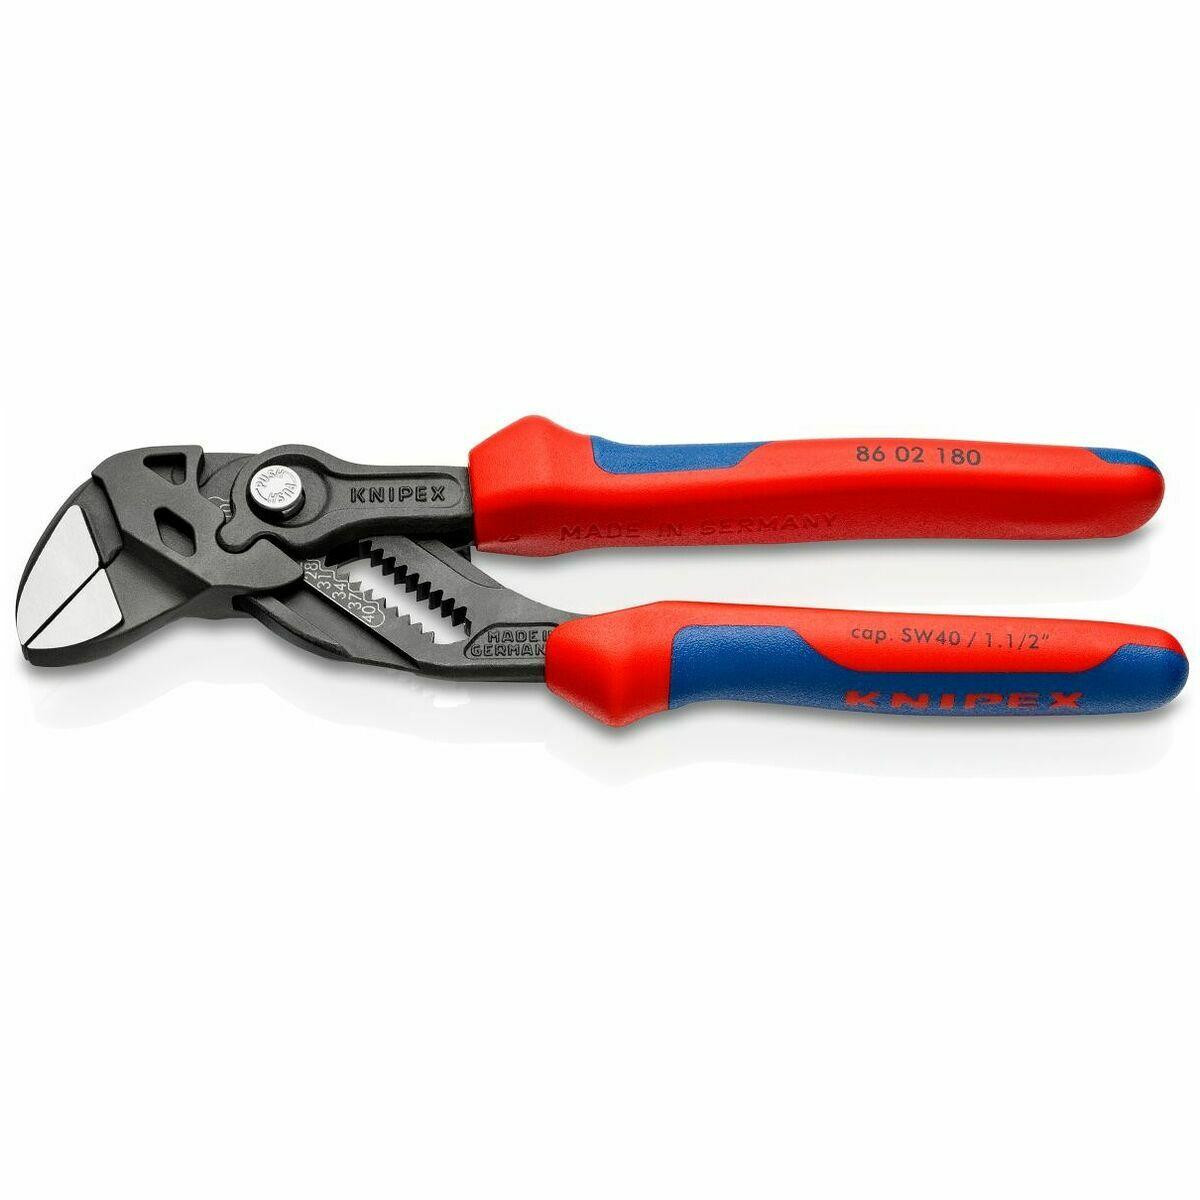 Yoke nut tool Knipex Pliers Wrench - Scuba Service Tools